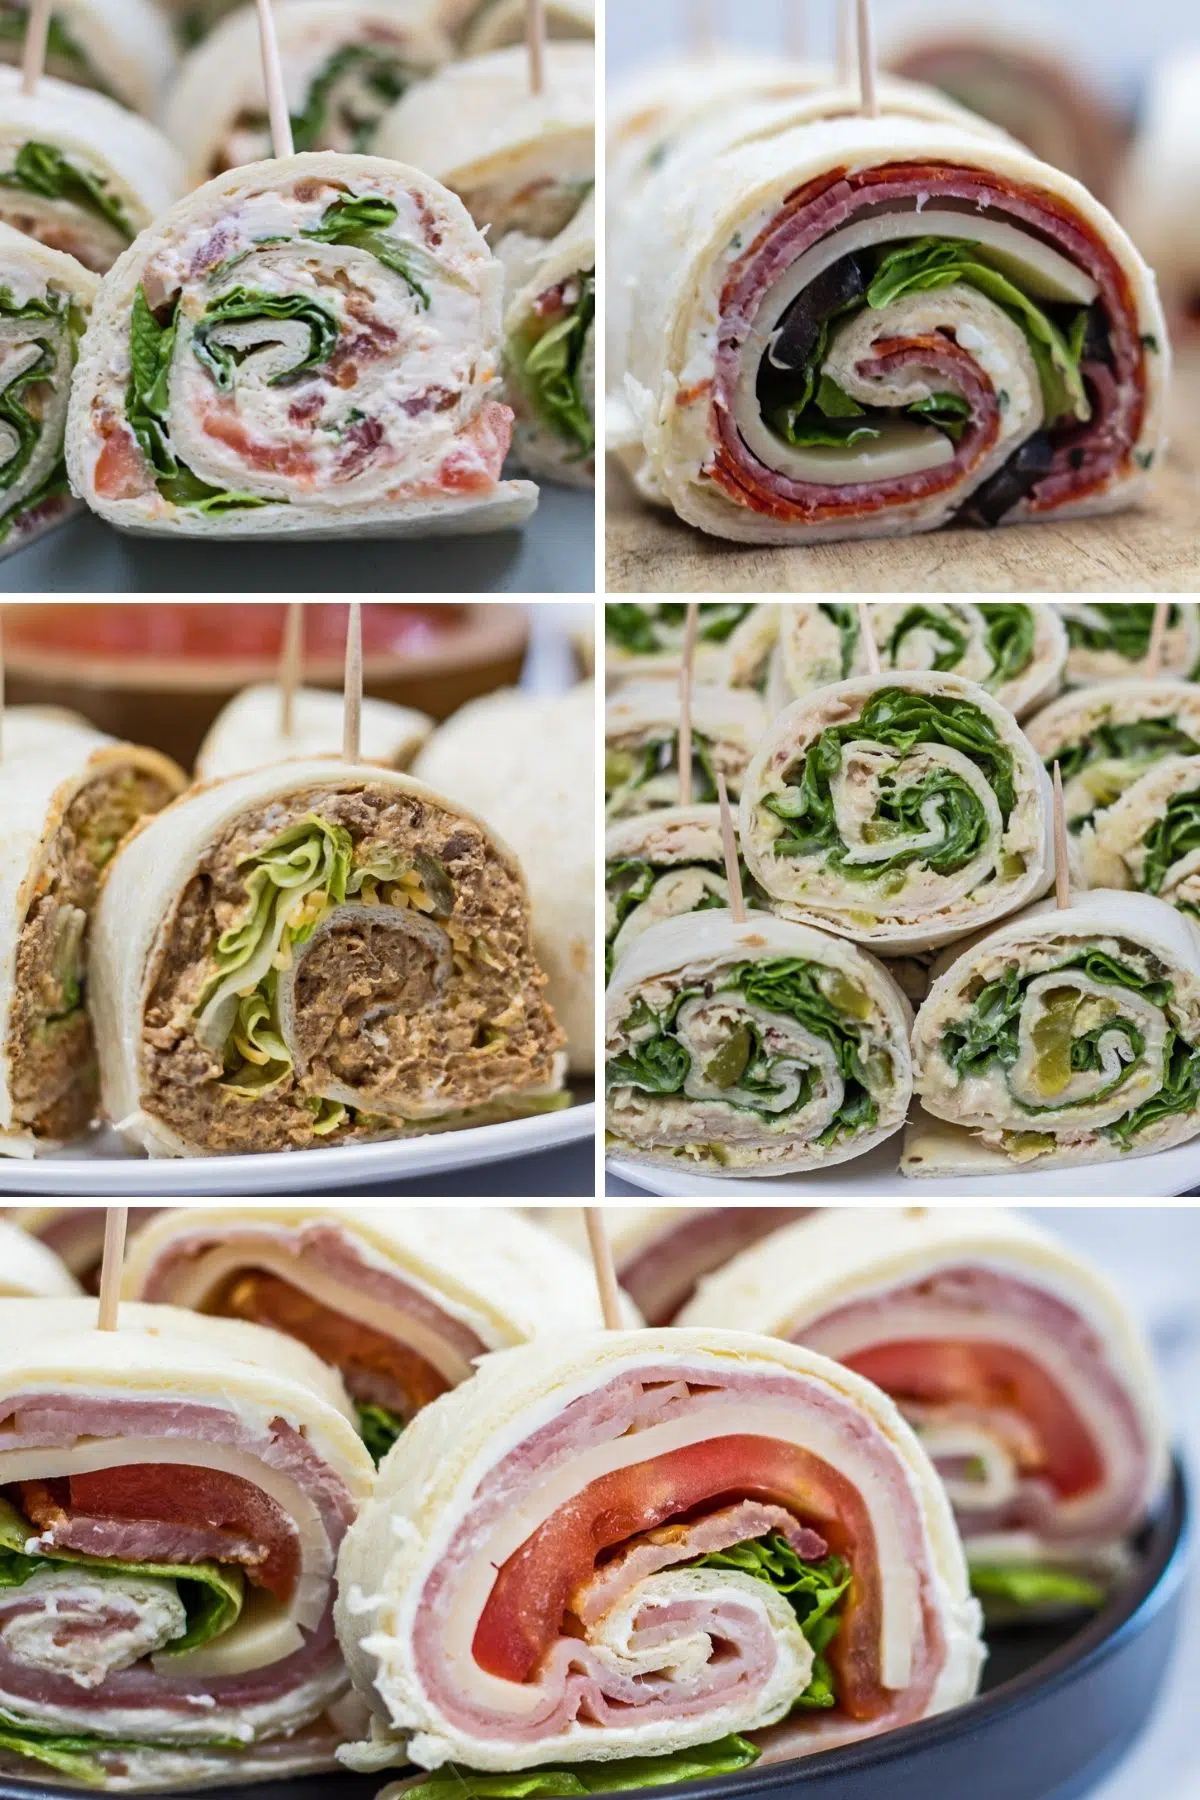 Pinwheel sandwiches collage showing 5 different rollup flavors.